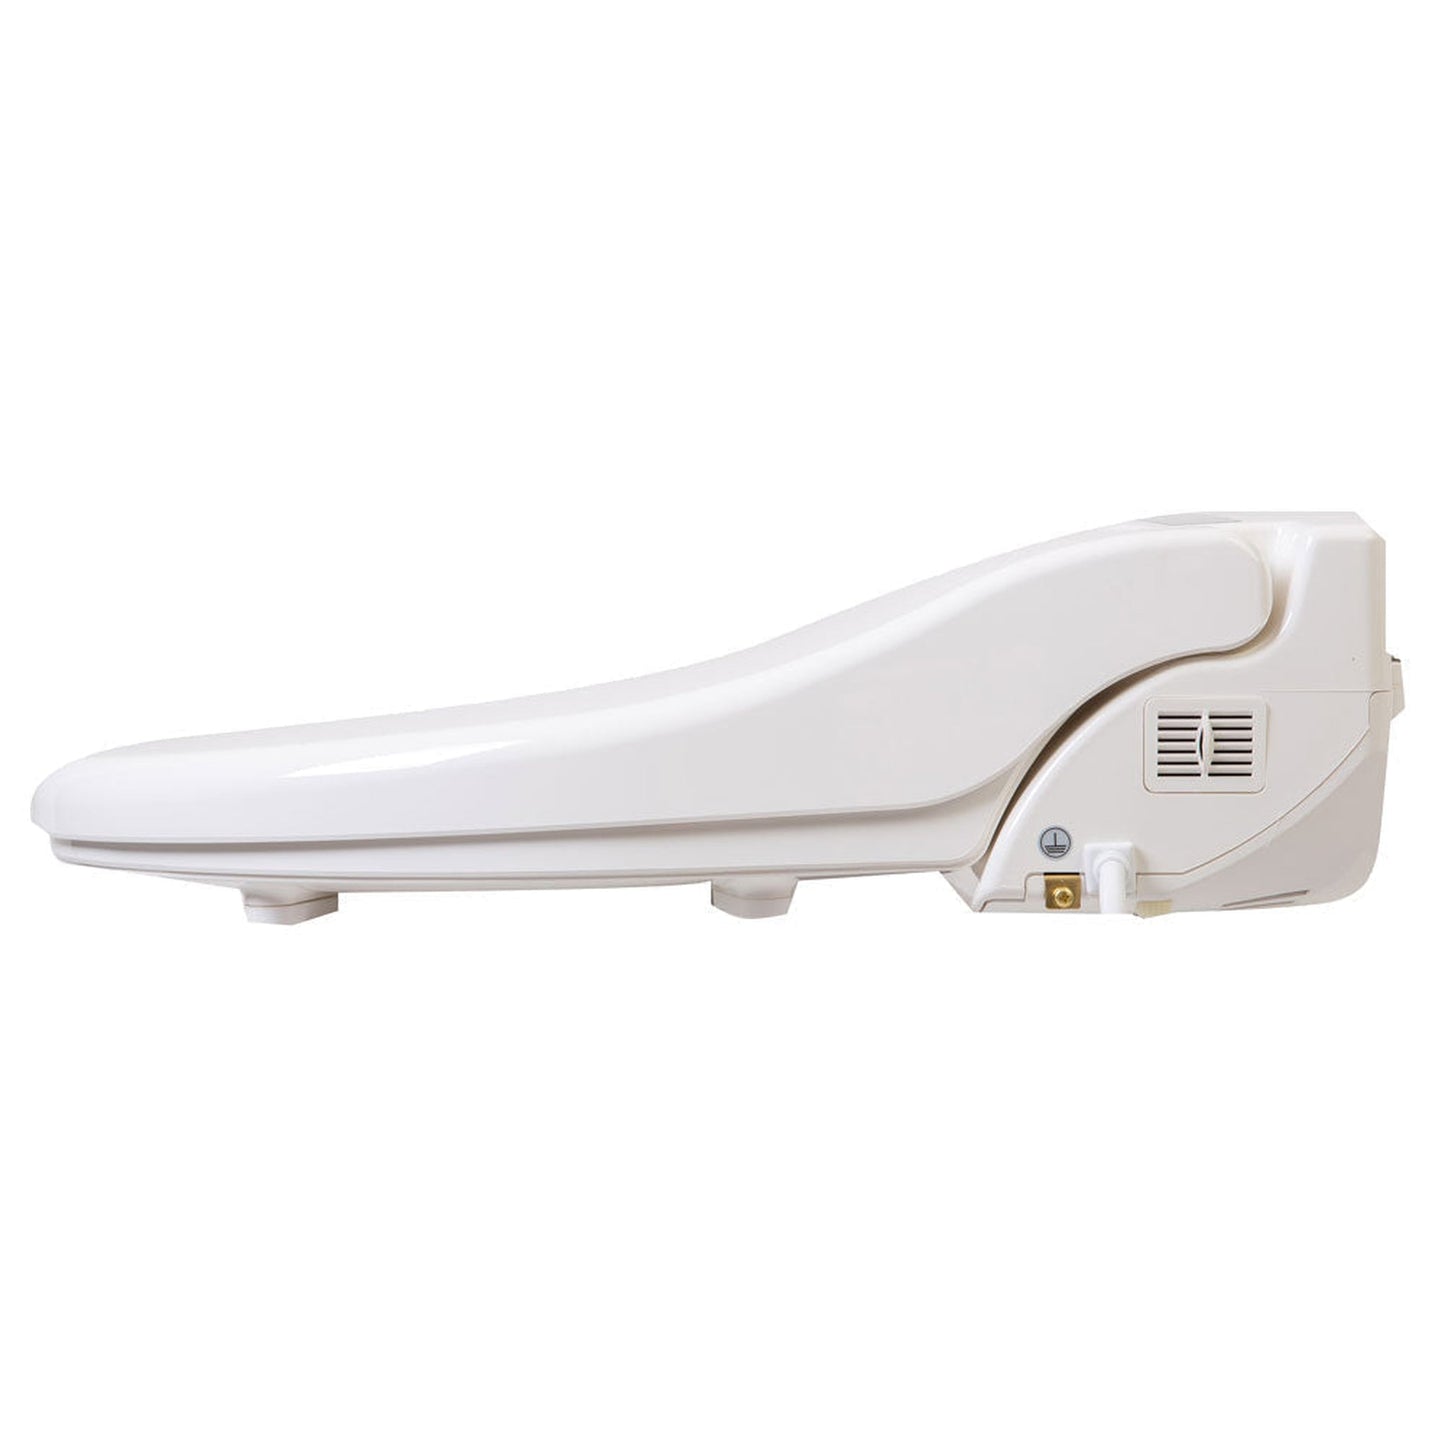 CleanSense DIB-1500R-EW-220 White Advanced Elongated Bidet Seat With LCD Remote Control and Energy Efficient Water Heating System 220V